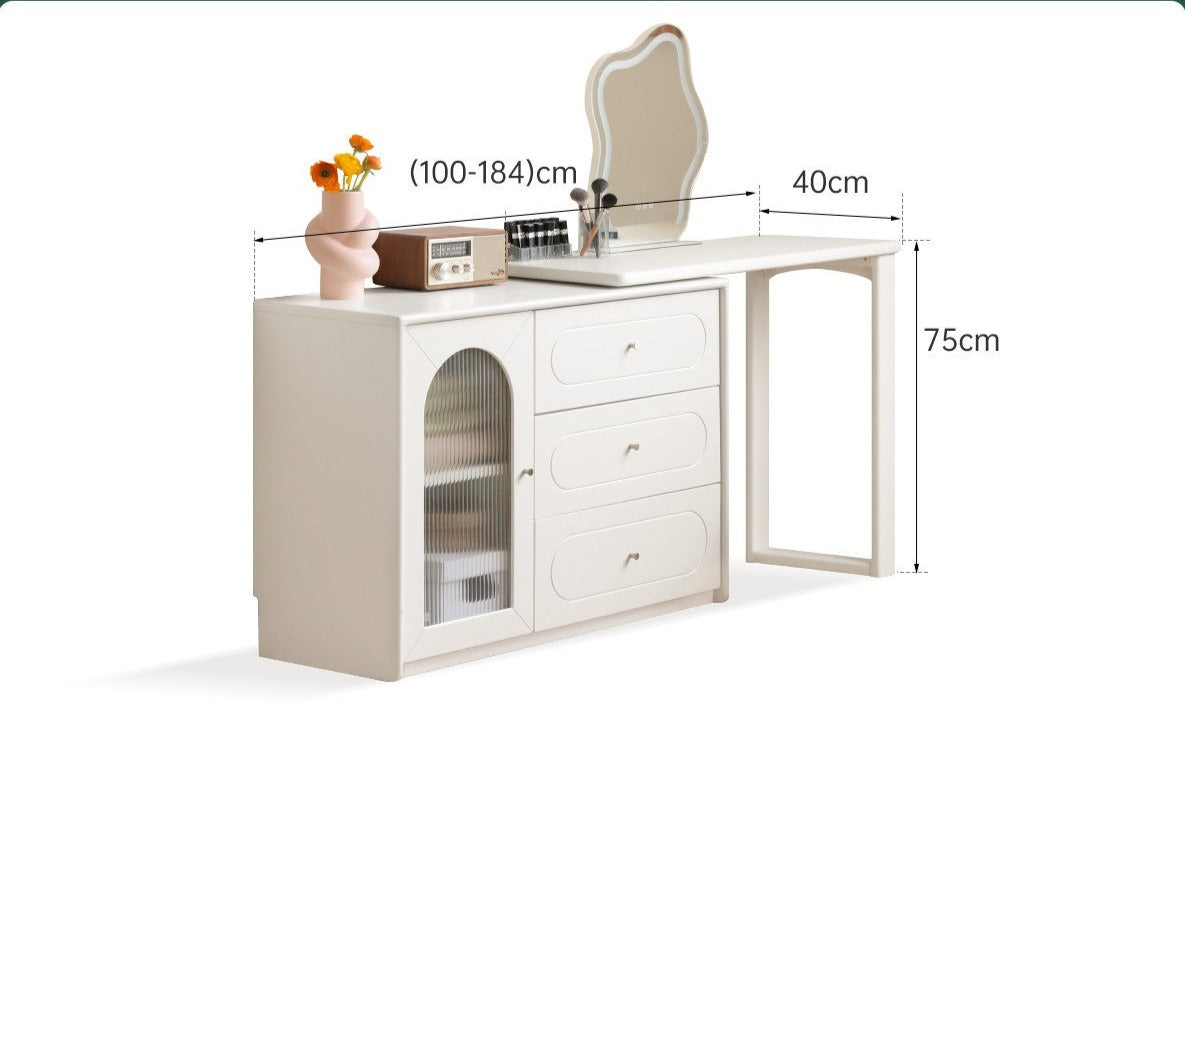 Poplar solid wood dressing table and cabinet integrated French cream style retractable "